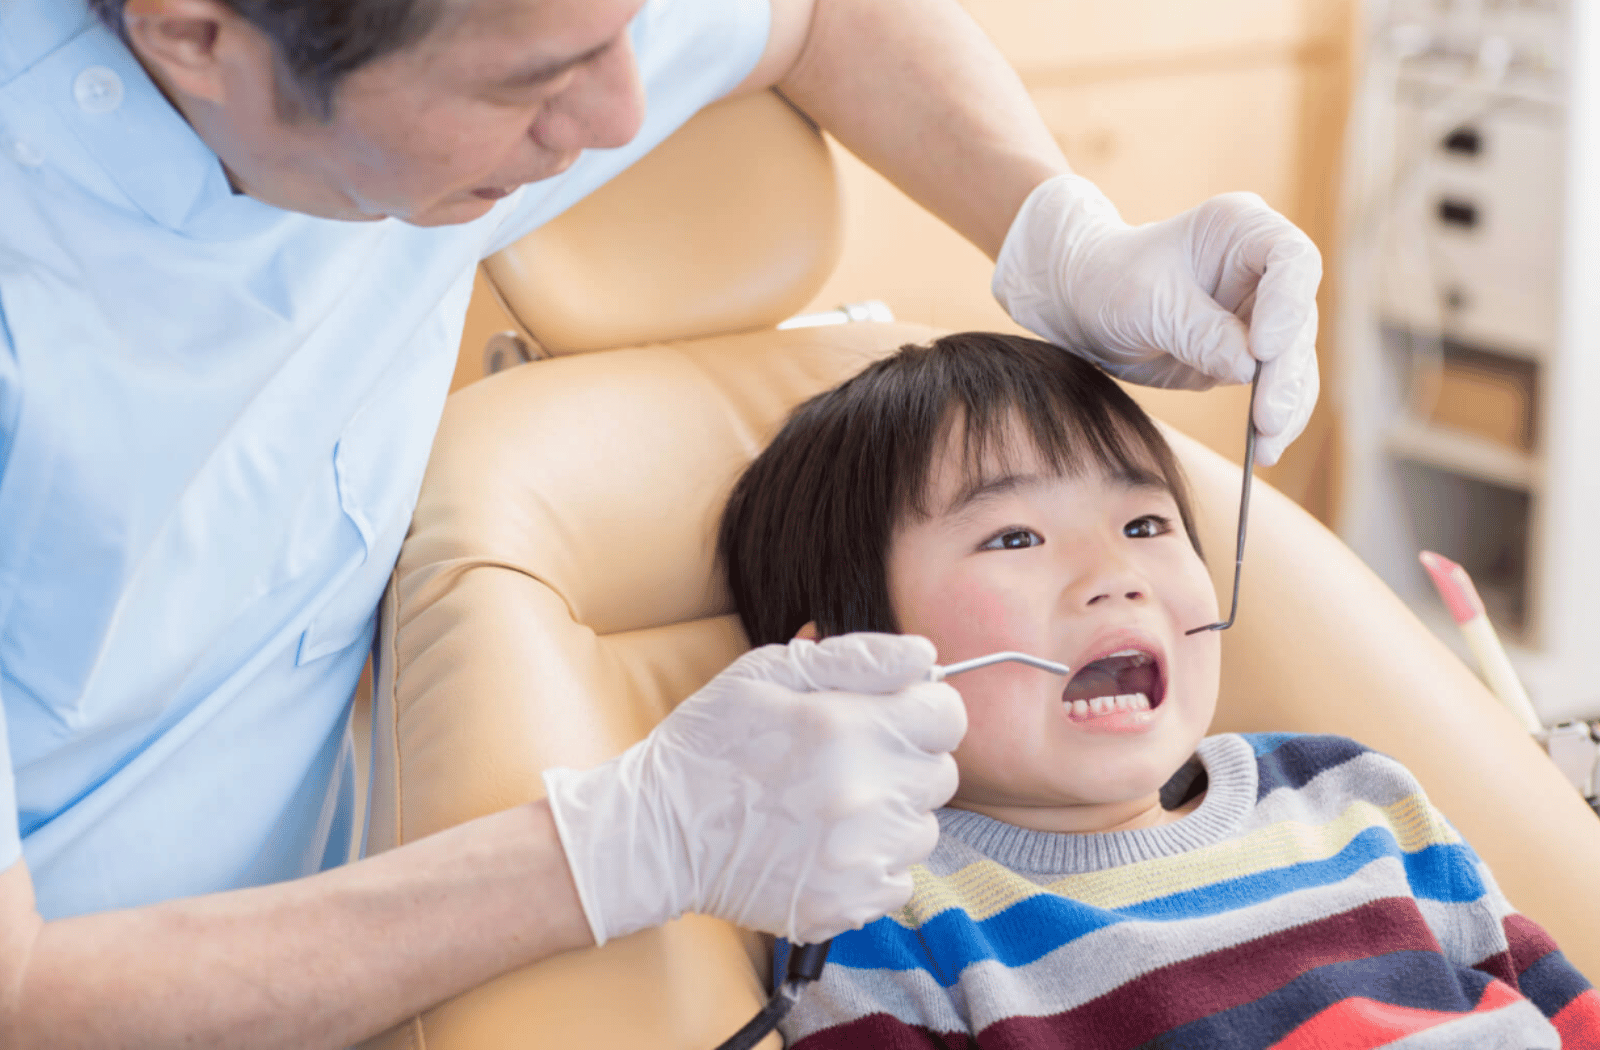 A male dentist is examining a boy's teeth at the dental clinic. The boy's mouth is wide open while the dentist is checking if the boy's teeth are okay